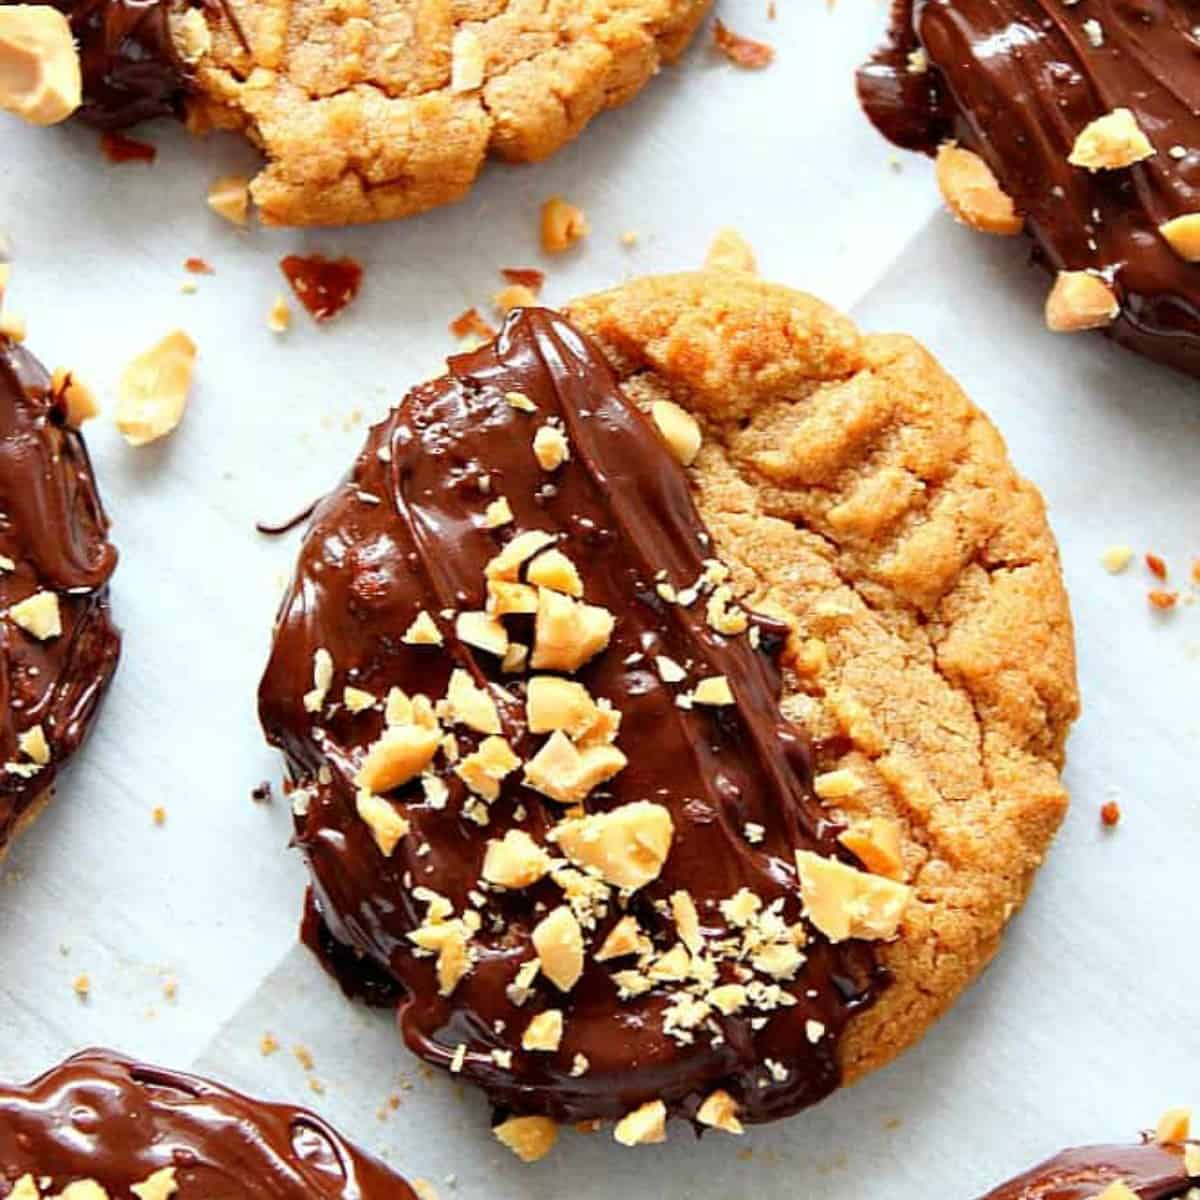 Chocolate peanut butter cookies on a parchment paper.